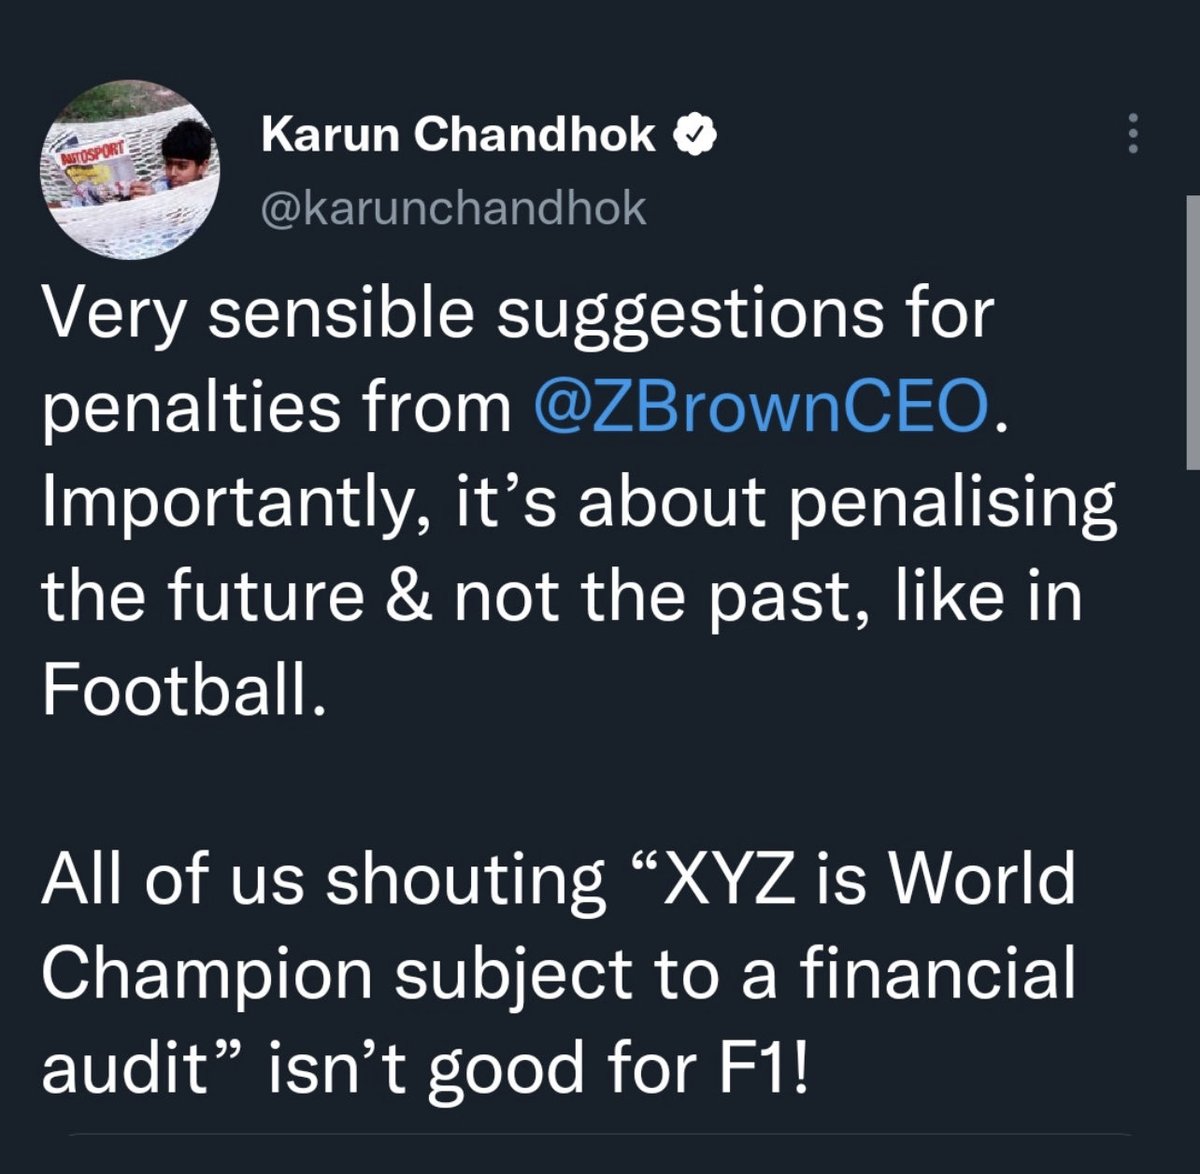 This is troubling. ⁦@karunchandhok⁩ take on this appears to be if you break the rules then penalties should not apply in that year but later & wins should be kept and it’s discussing penalising that rule breaking that’s damaging the sport - not the actual rule breaking? 🙄